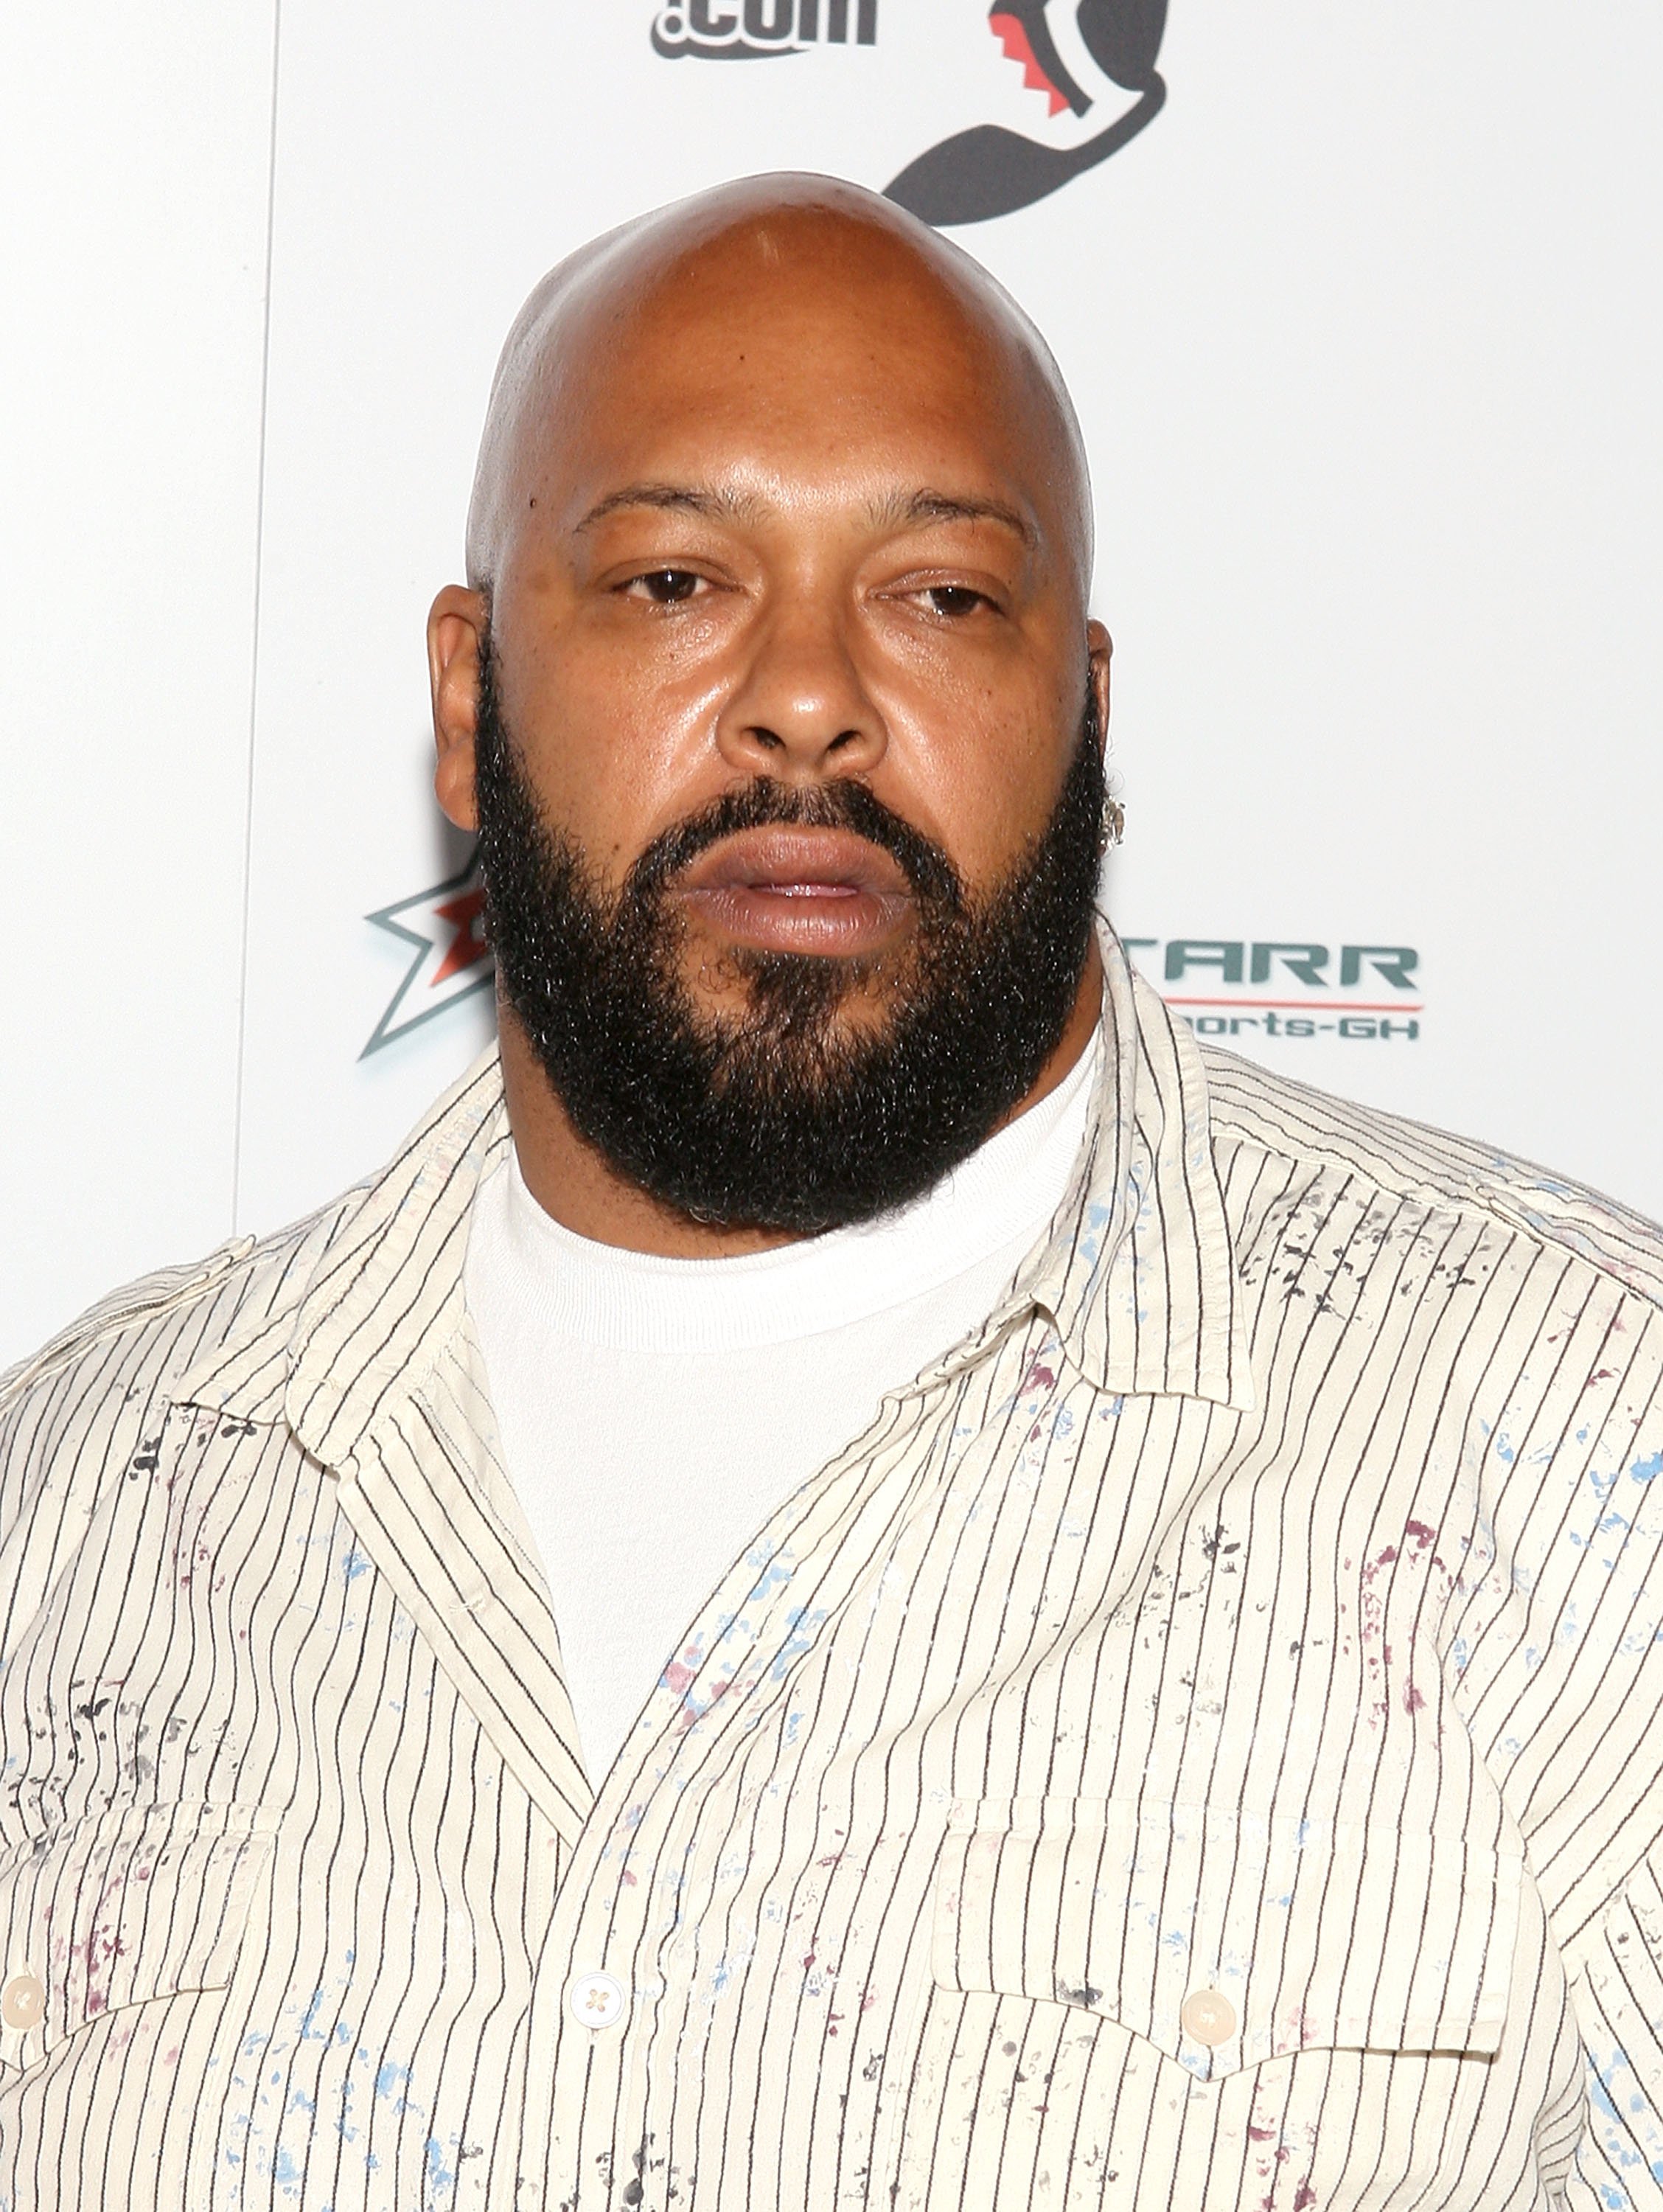 Suge Knight at the NFL Draft inauguration party in Hollywood, California in 2008. | Photo: Getty Images